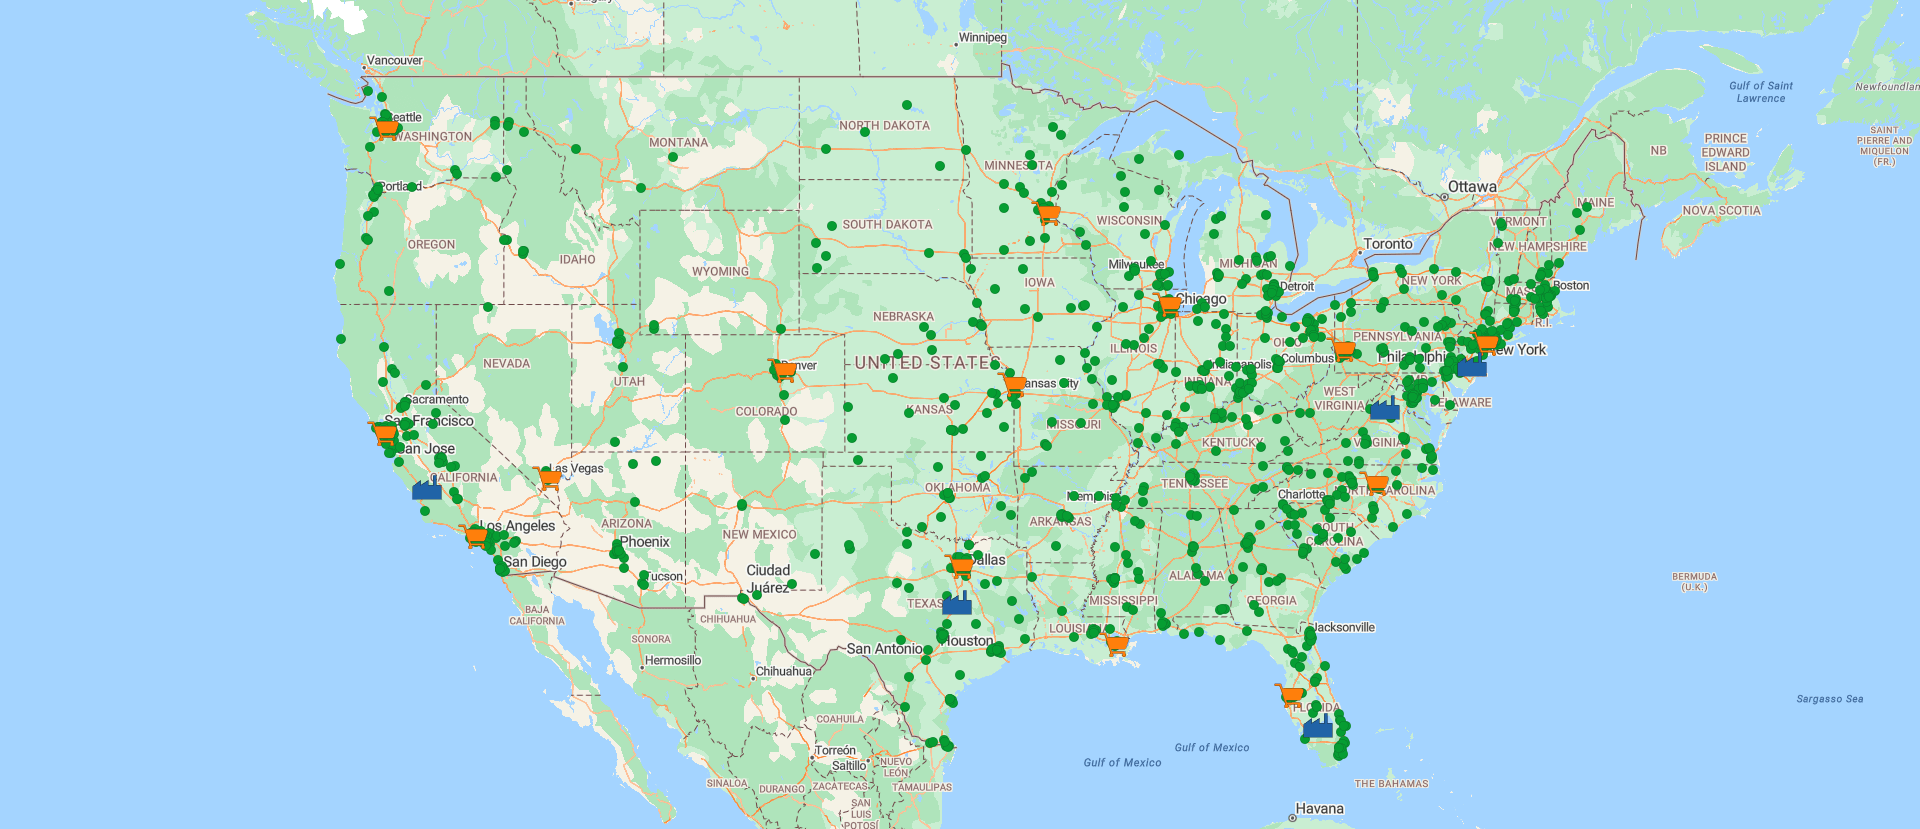 Supply centres map